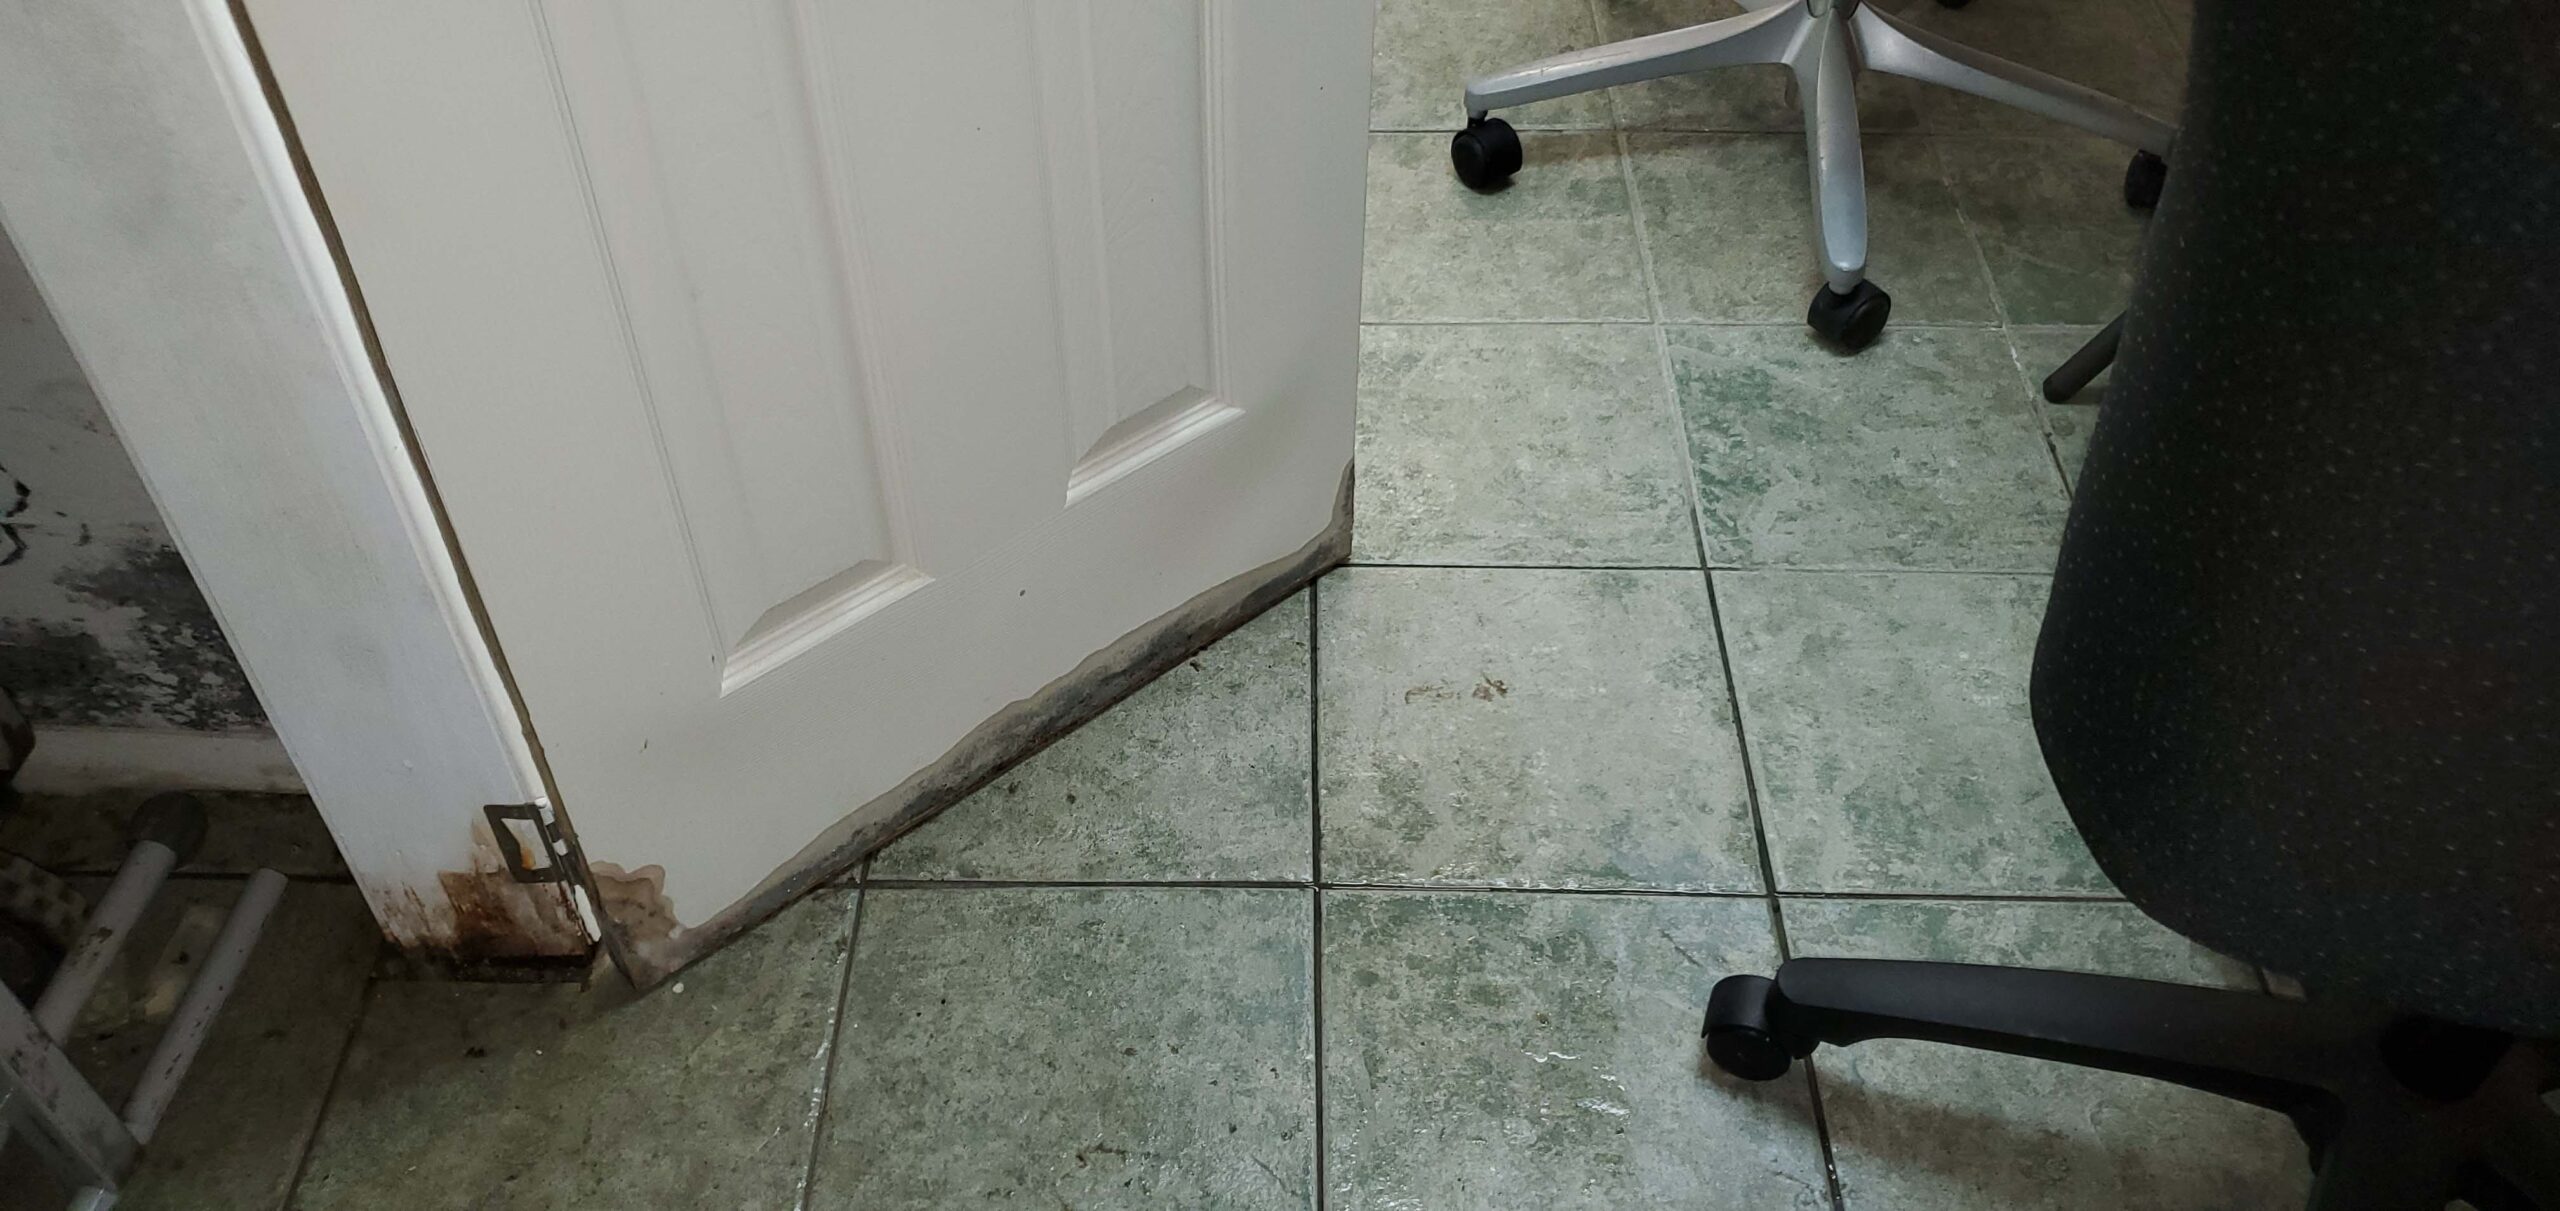 door and floor water damage in flushing ny